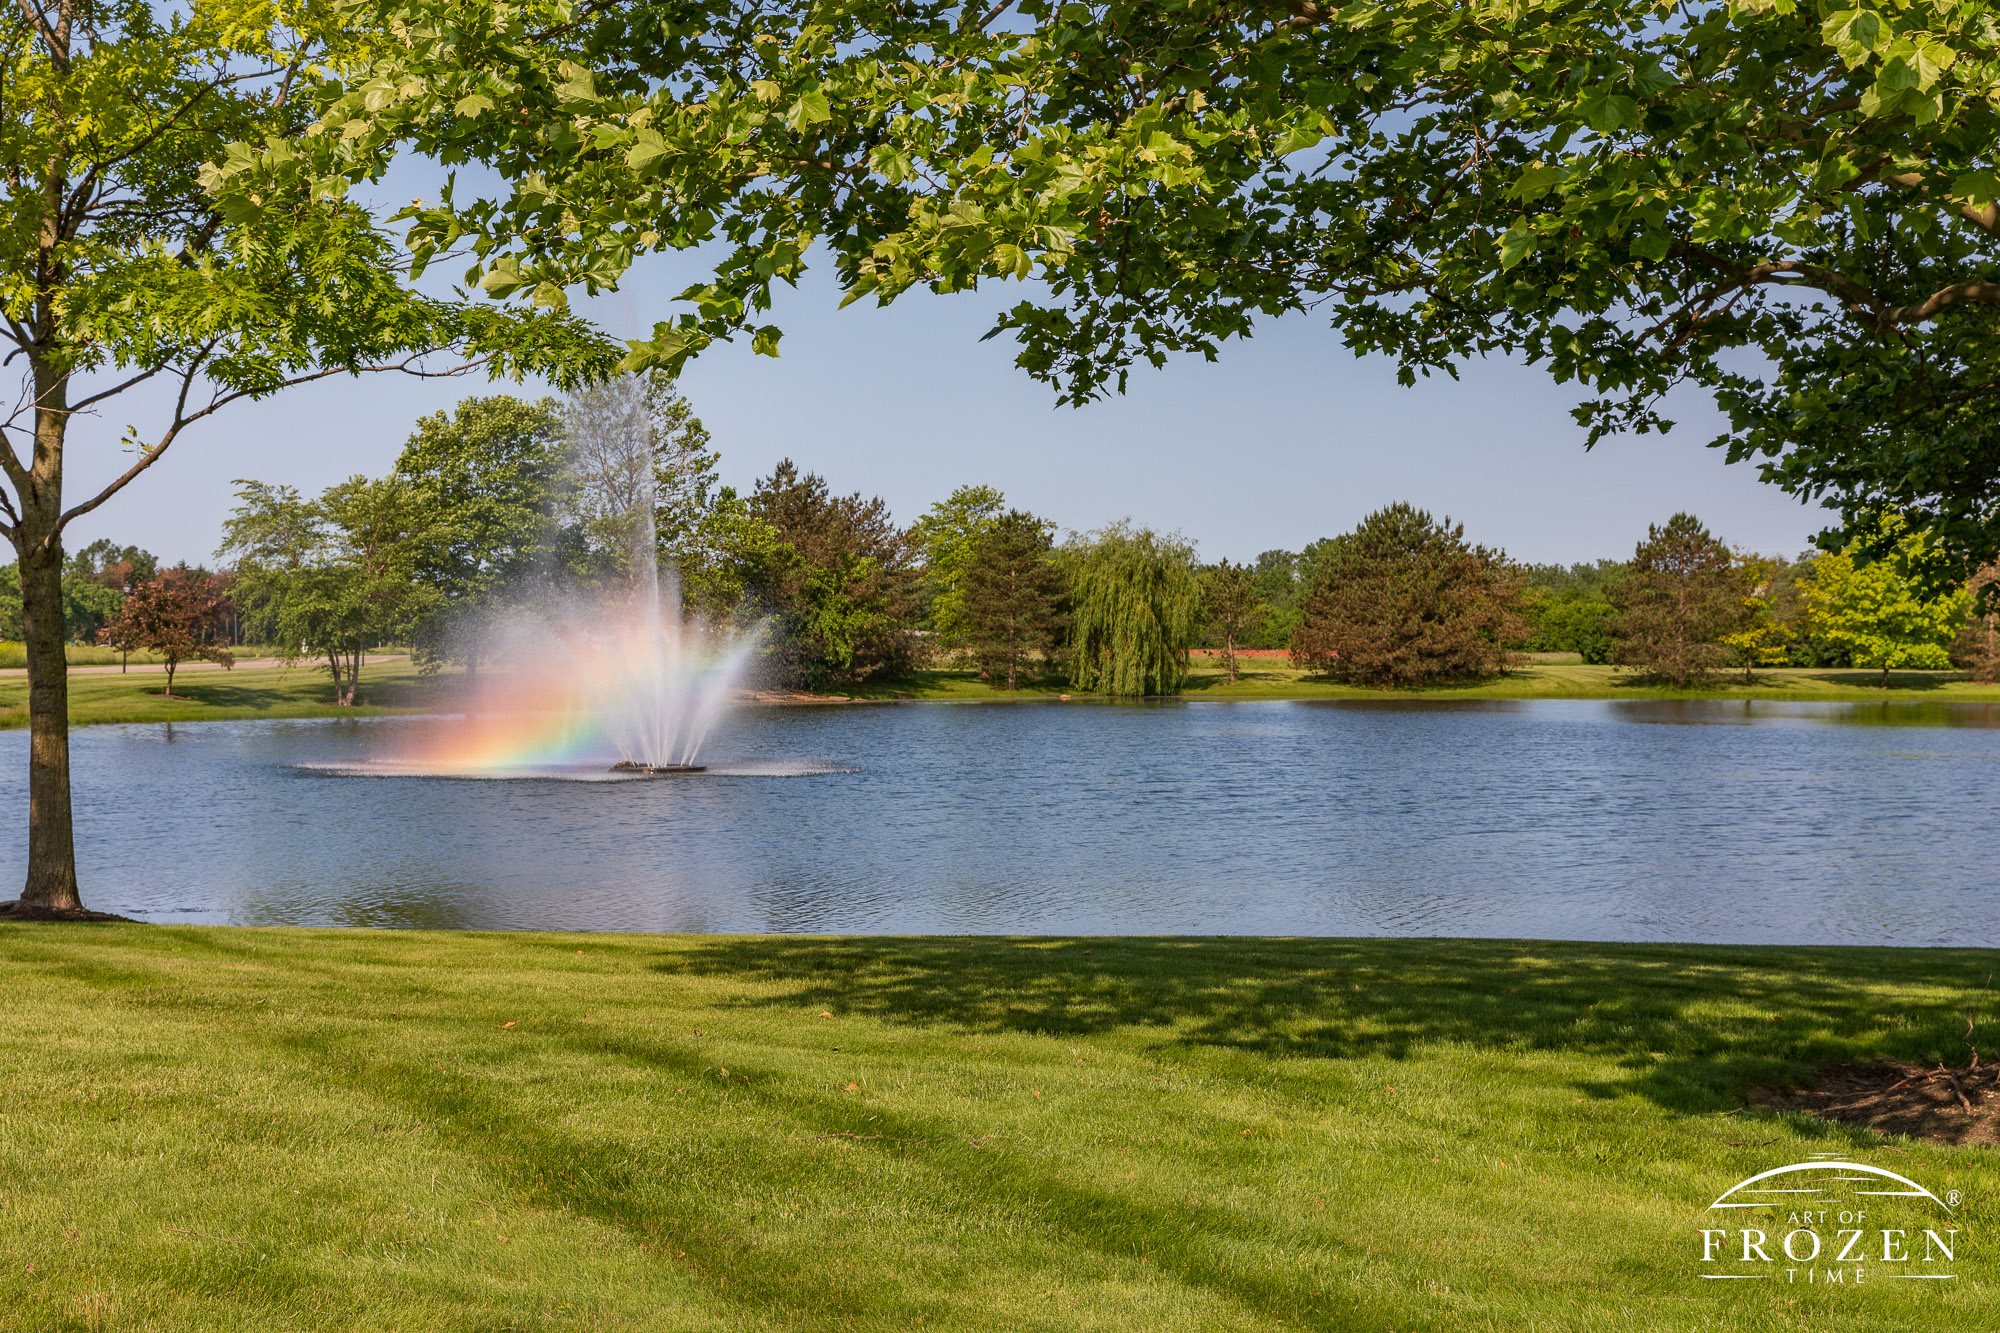 The spray from a fountain in a small lake refracts rainbow colors in the gentle summer breeze.